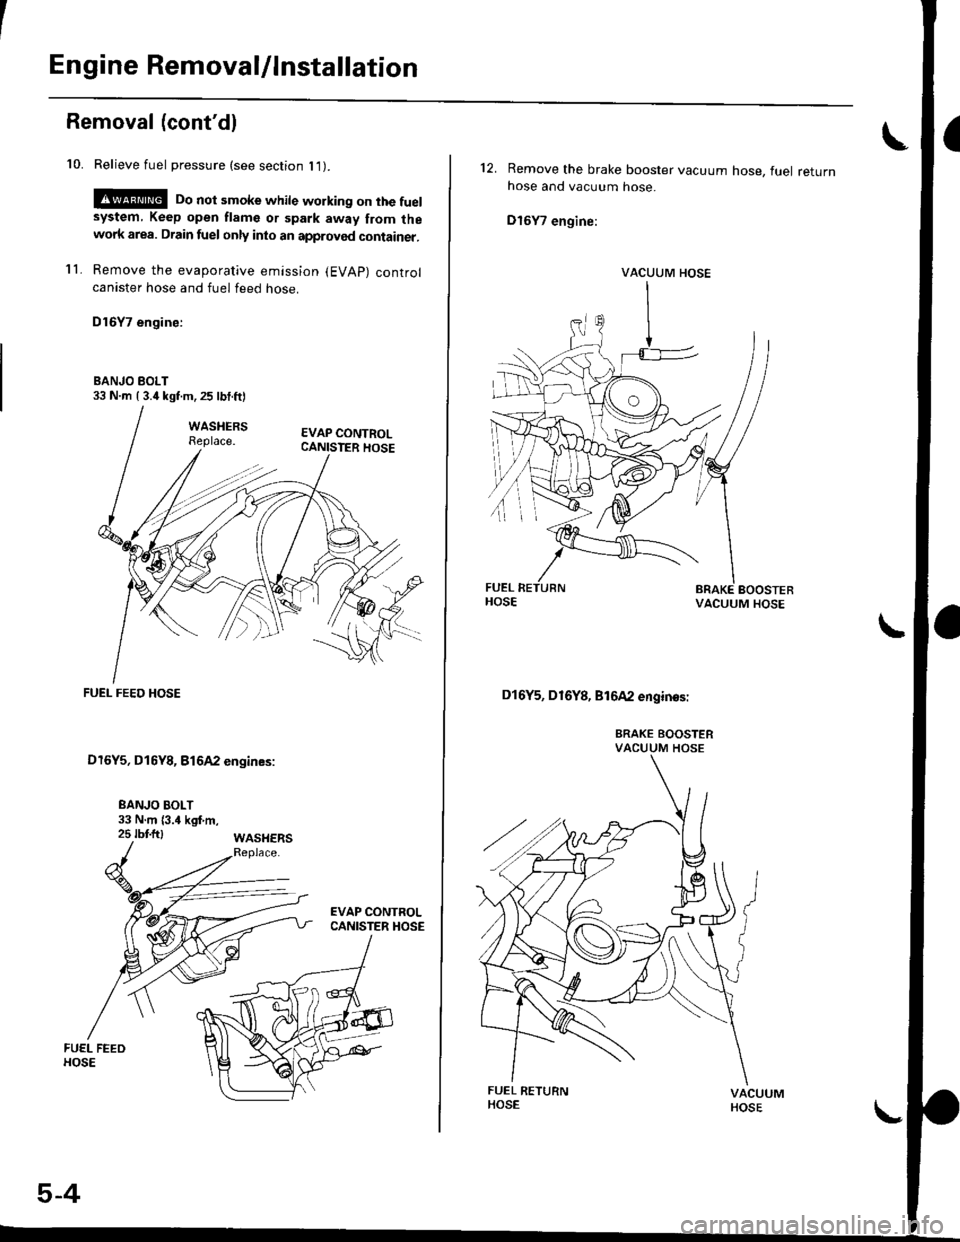 HONDA CIVIC 1996 6.G Workshop Manual Engine Removal/lnstallation
Removal (contdl
10. Relieve fuel pressure (see section l1).
!@ Do not smoke while working on the fuelsystem, Keep open flame or spark away from thewolk area. Drain fuel on